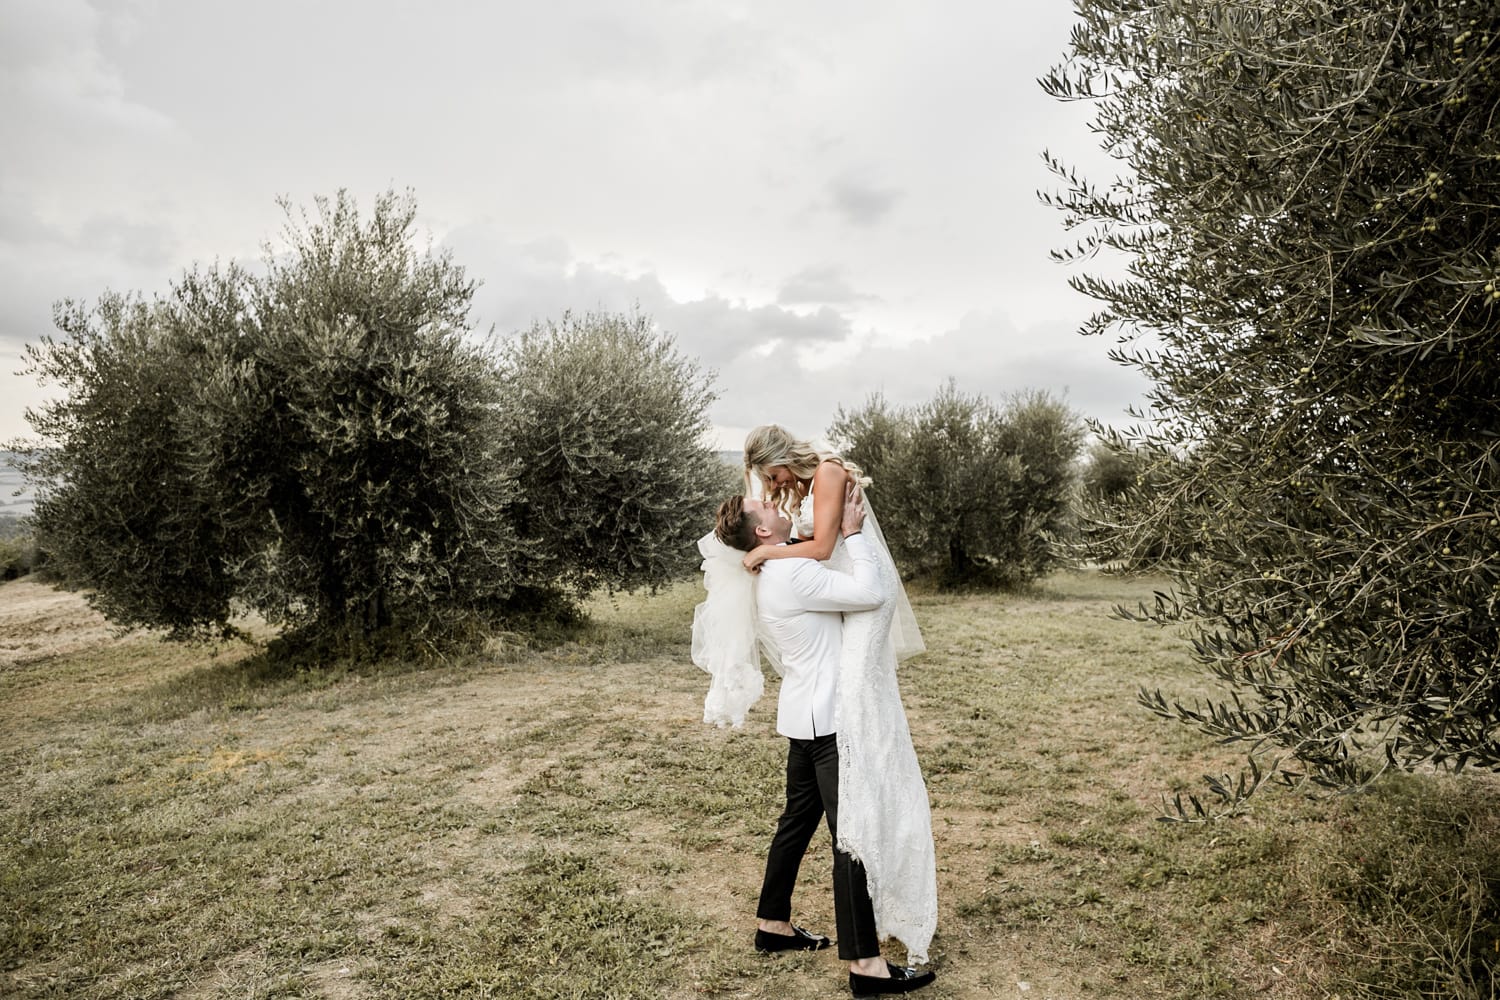 Groom lifts bride during couple's portraits after destination wedding in Tuscany, Italy